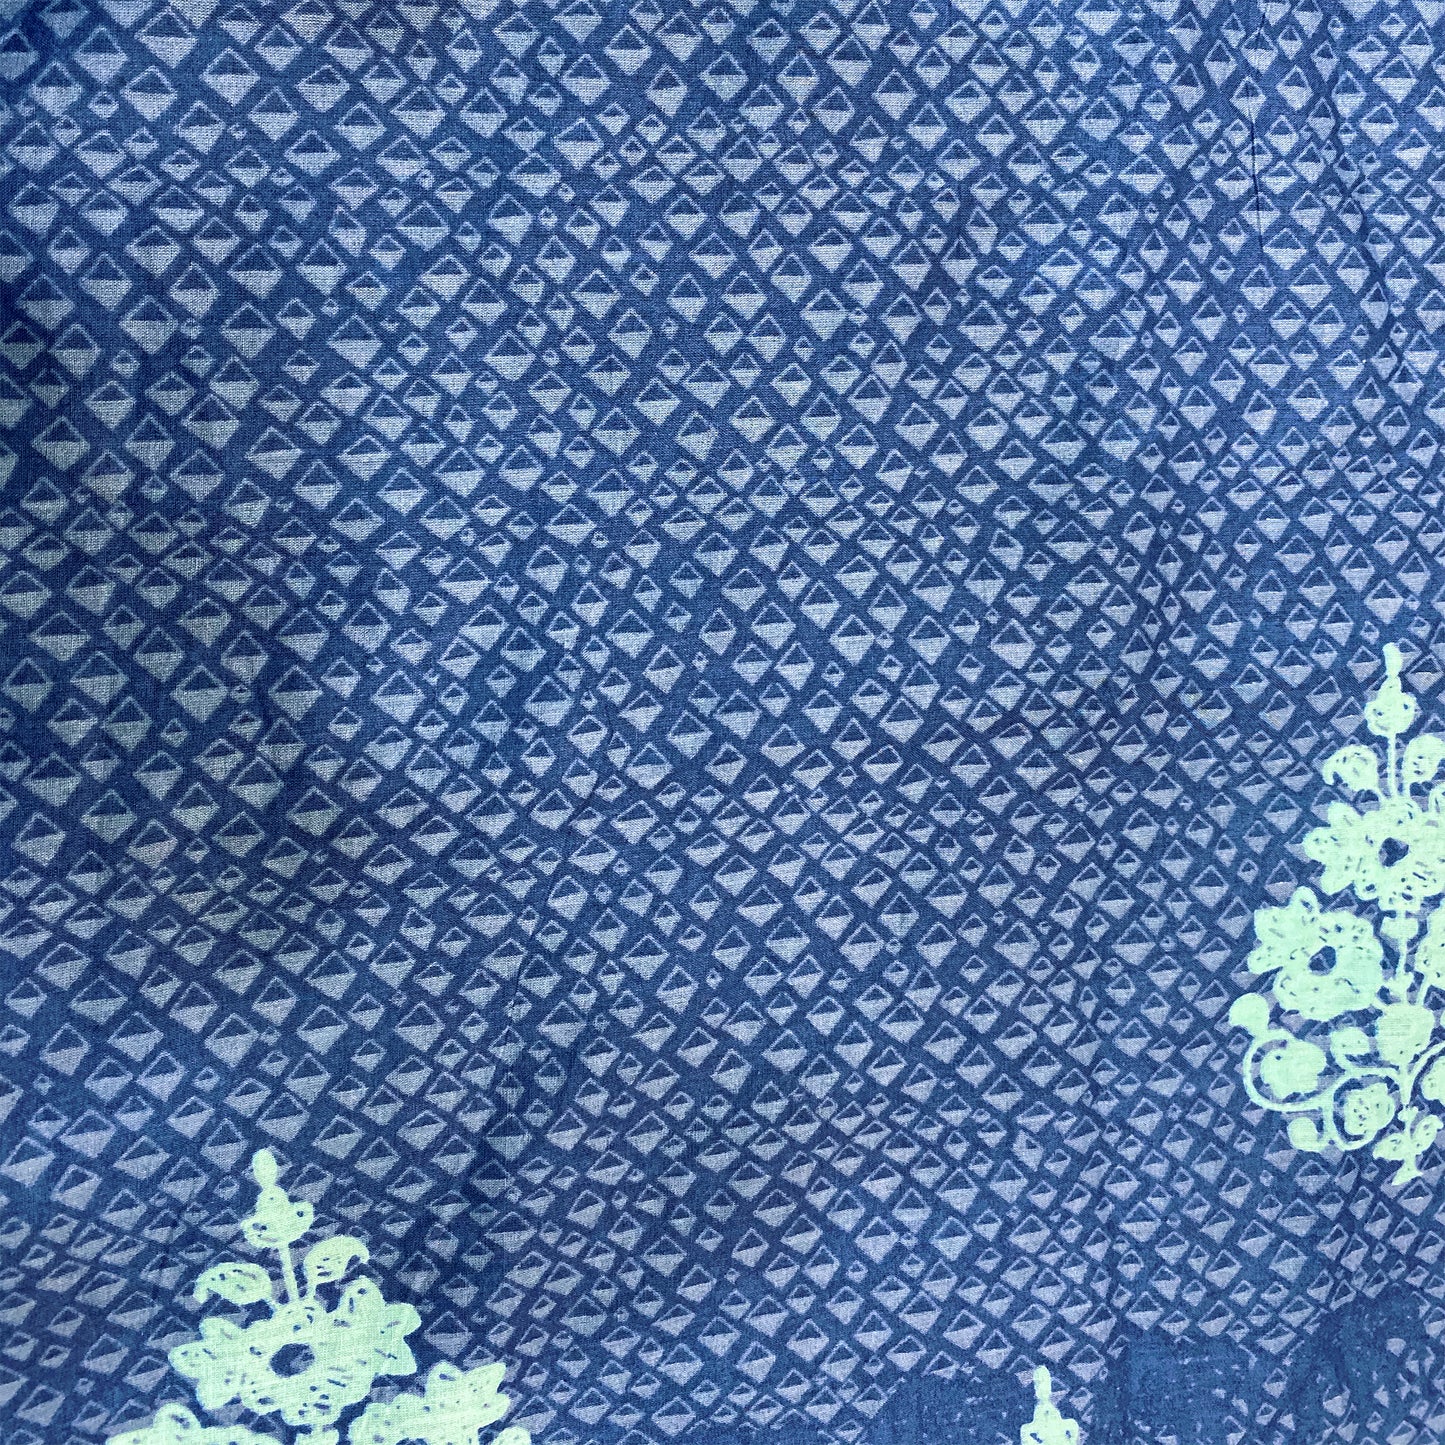 Printed Cotton Fabric With Elephant Border